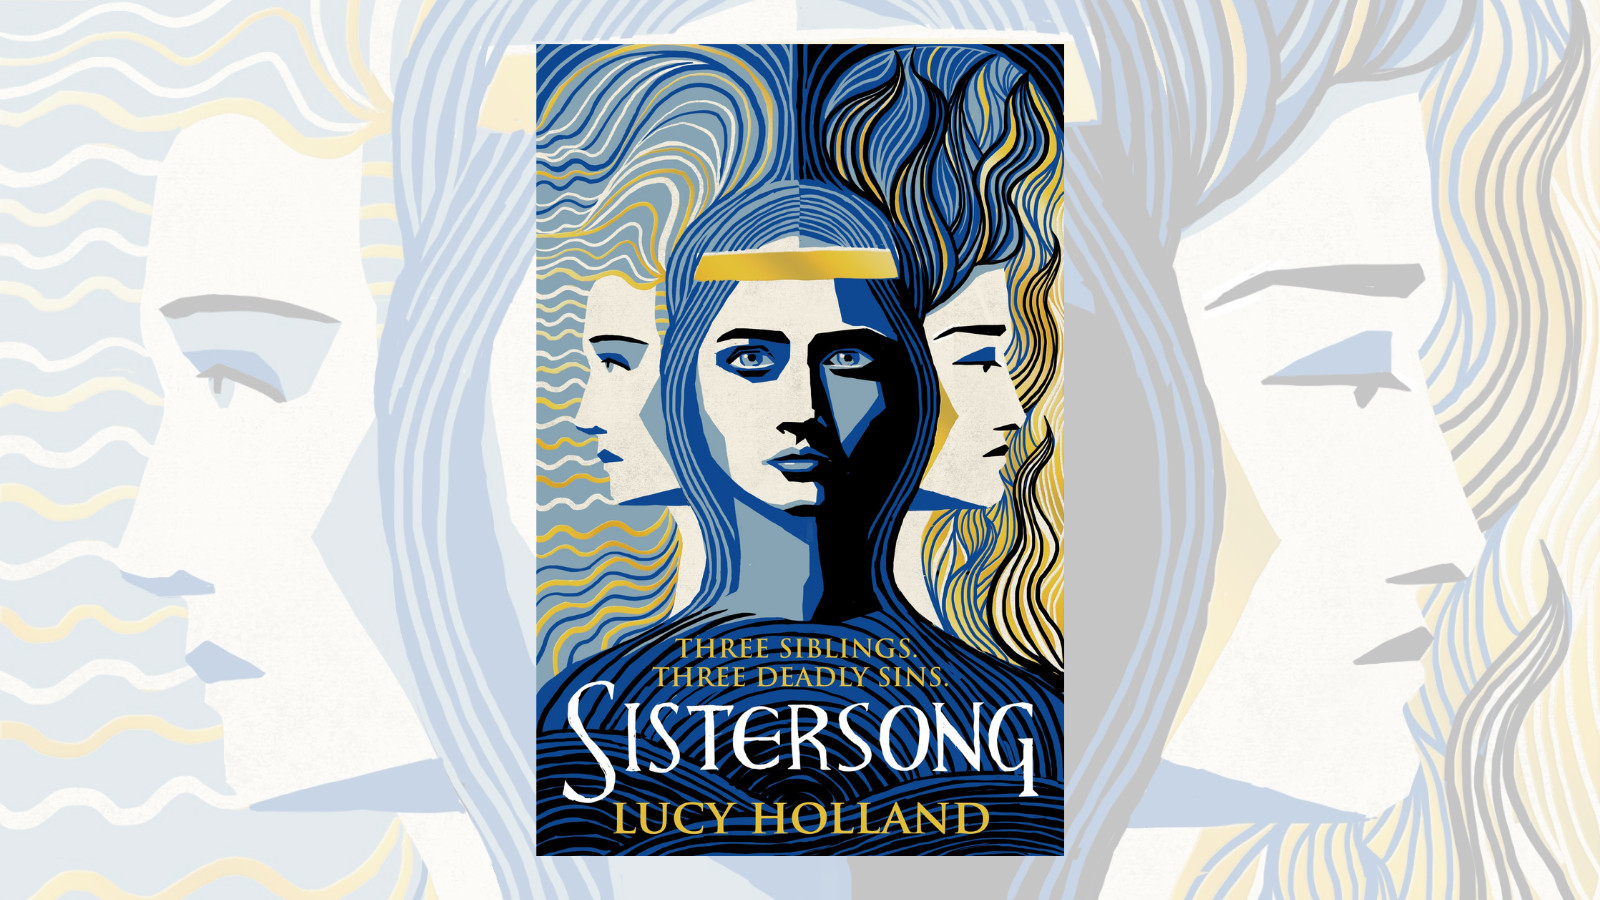 sistersong lucy holland